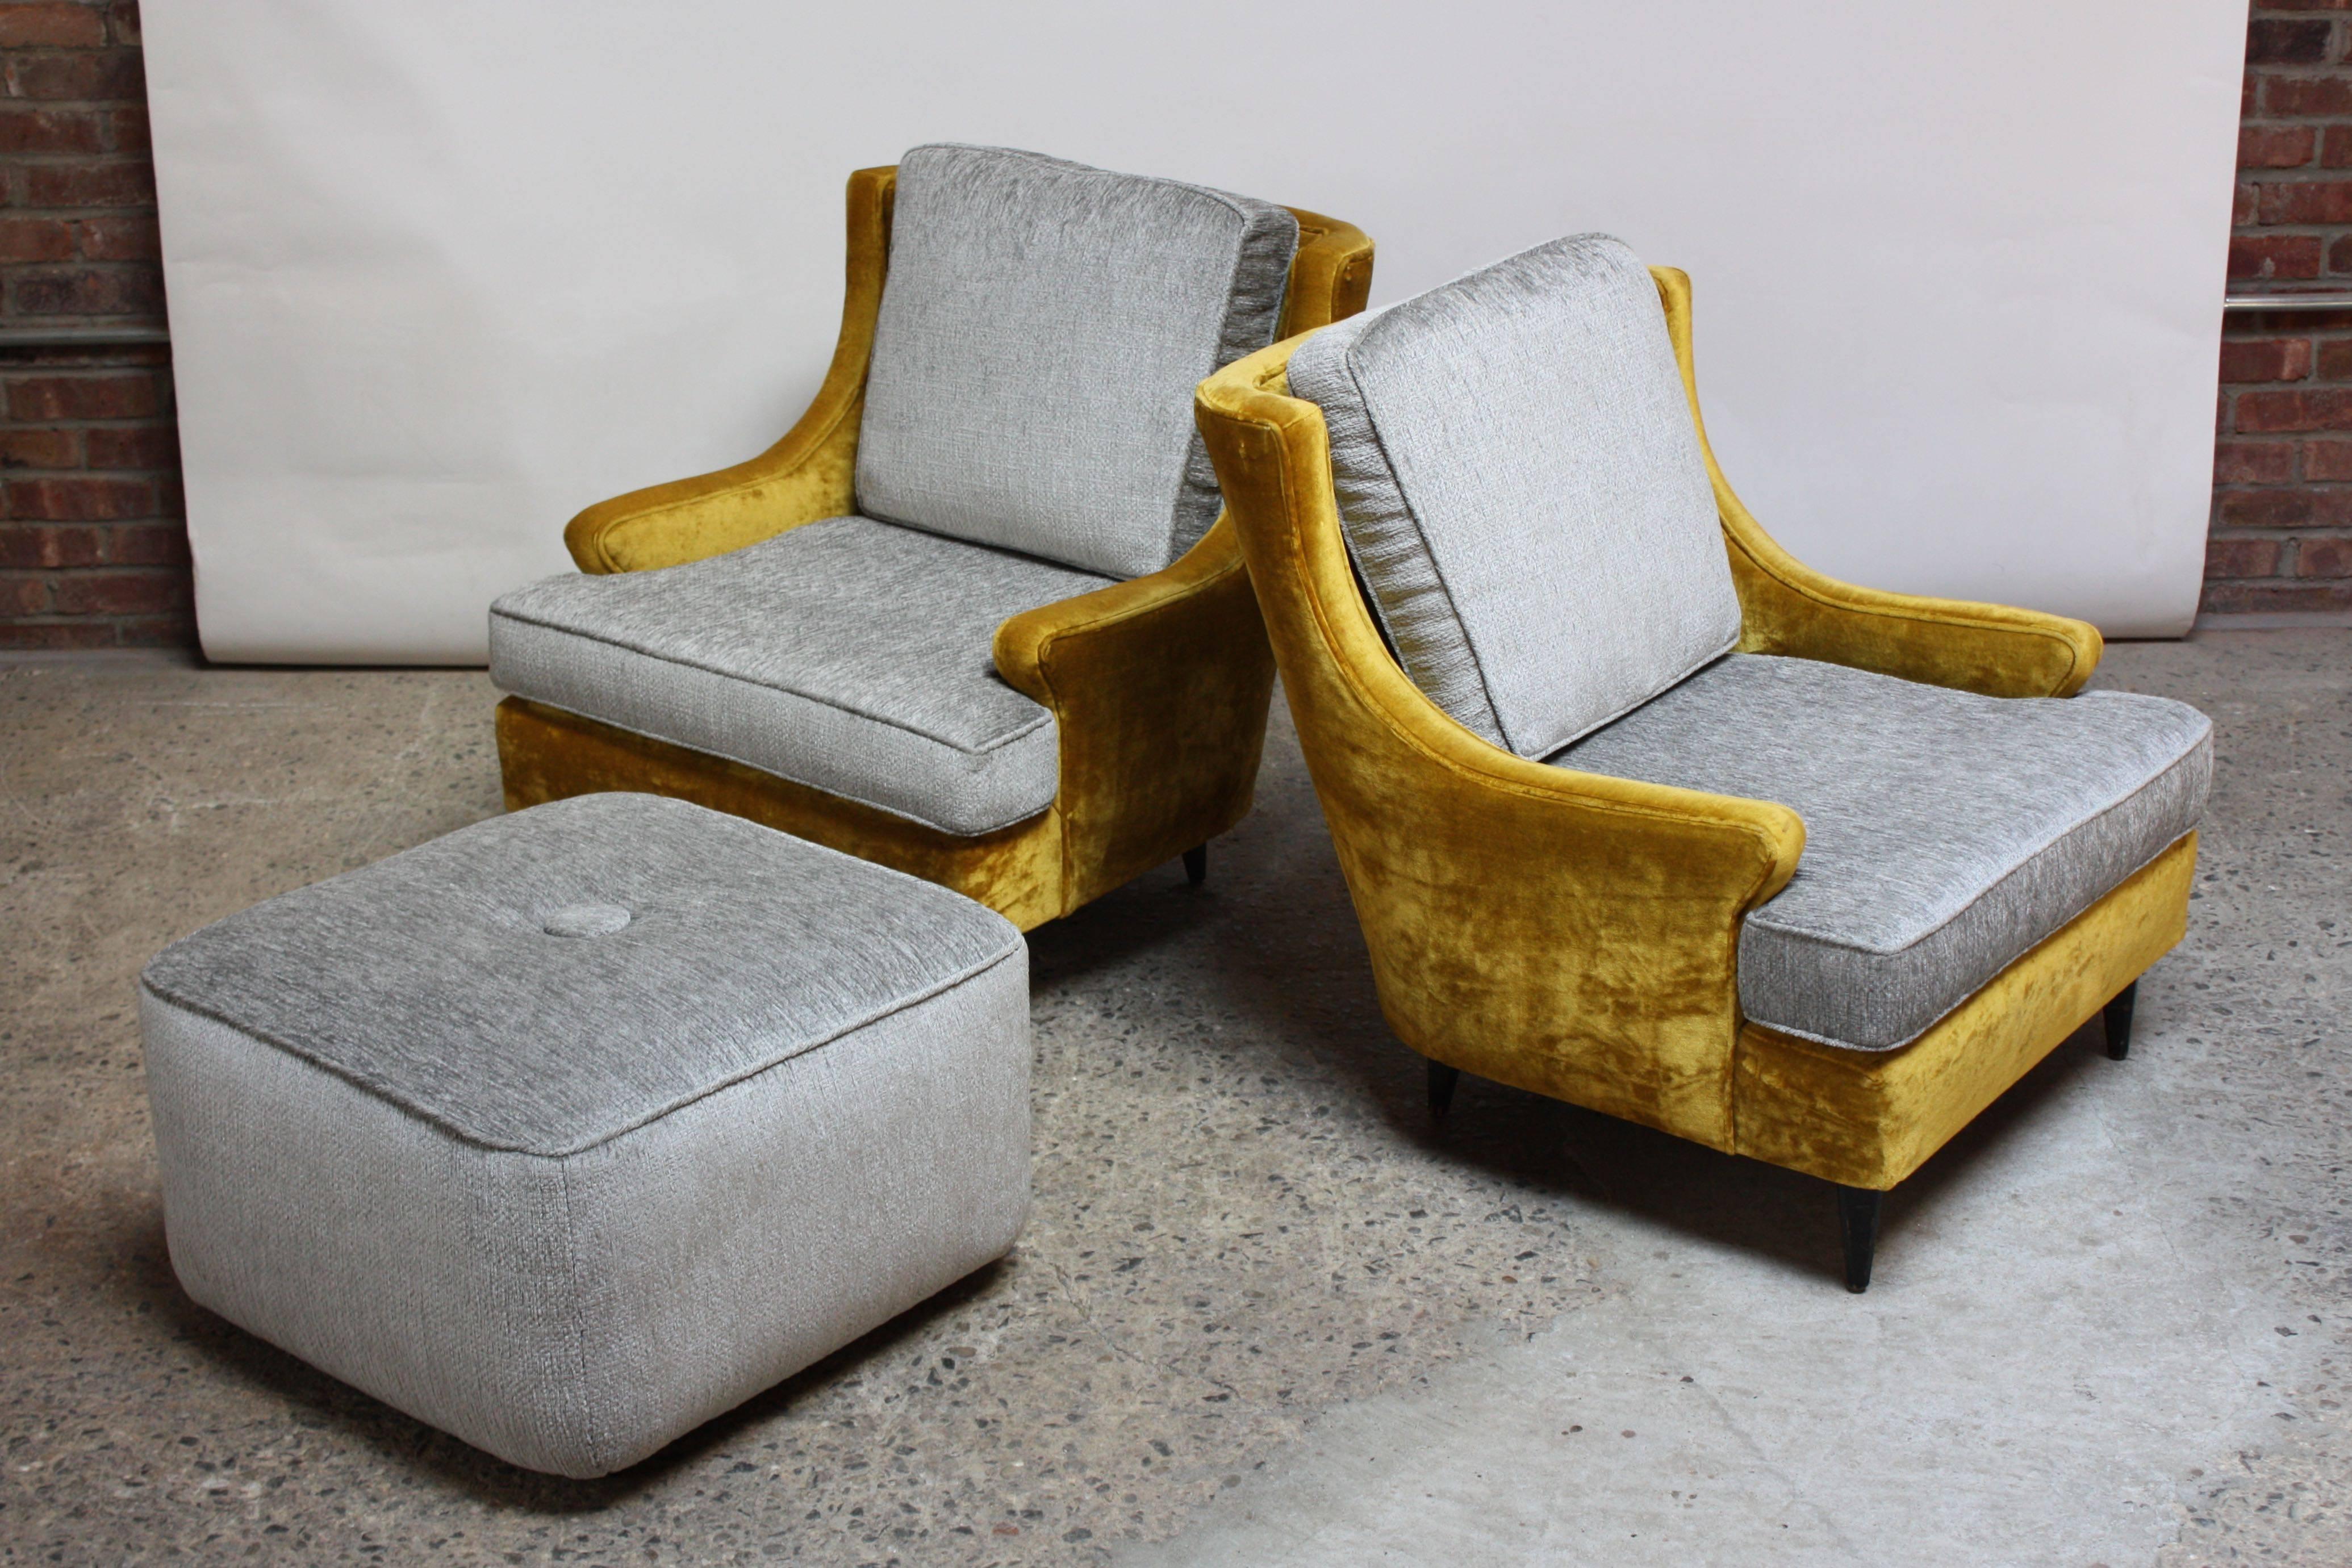 This luxurious pair of low 1950s lounge chairs retains the original mustard velvet shell. The cushions have been redone in a steel grey chenille, and the foam has been replaced. The feet retain their original ebony stain. The matching oversized